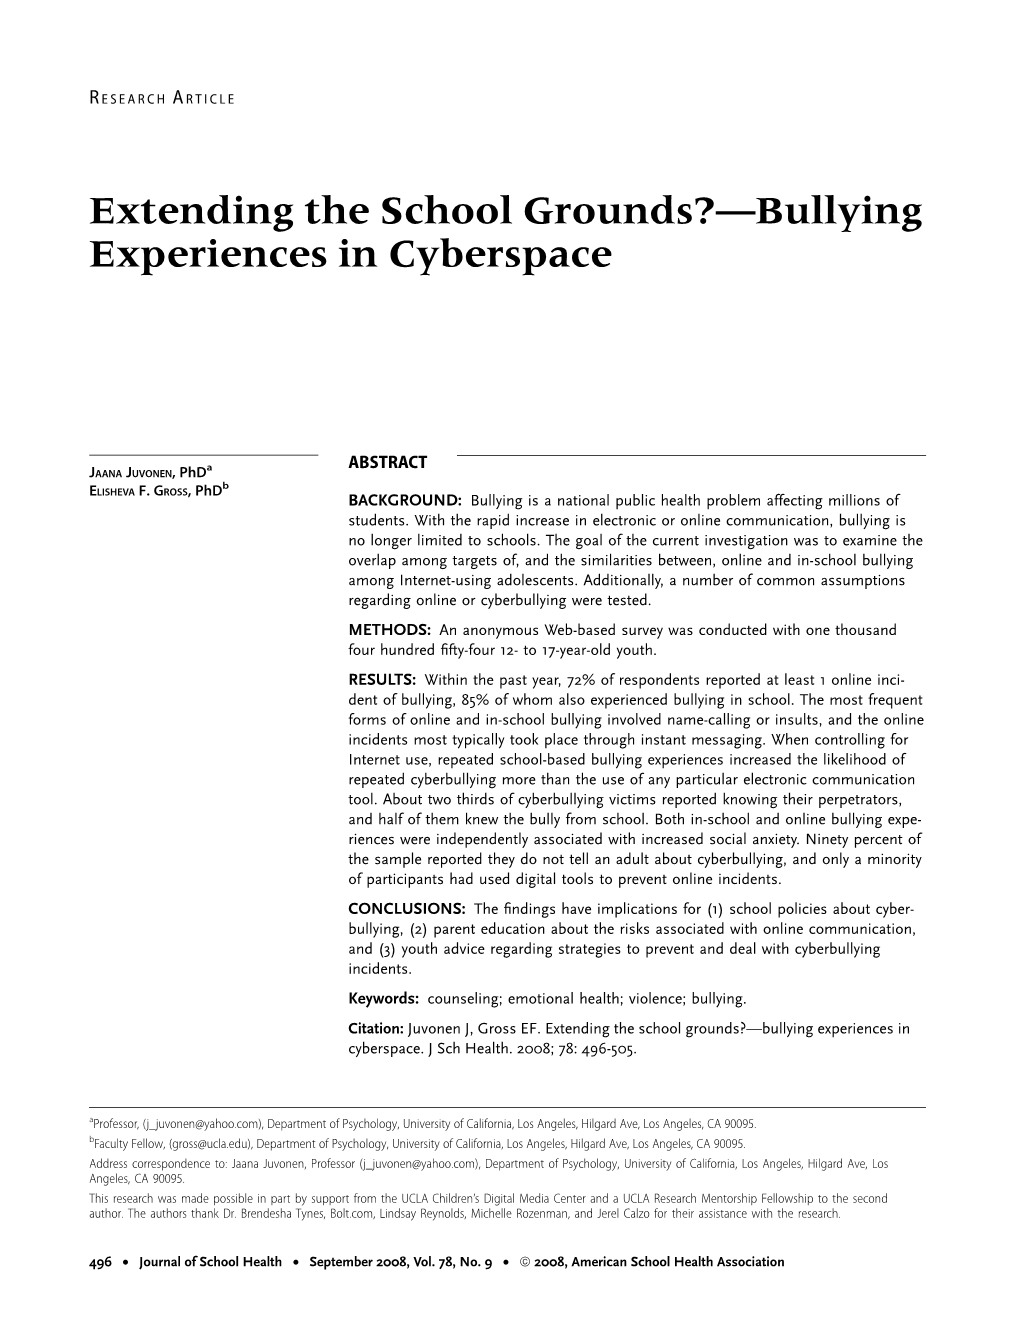 Extending the School Grounds? Bullying Experiences in Cyberspace